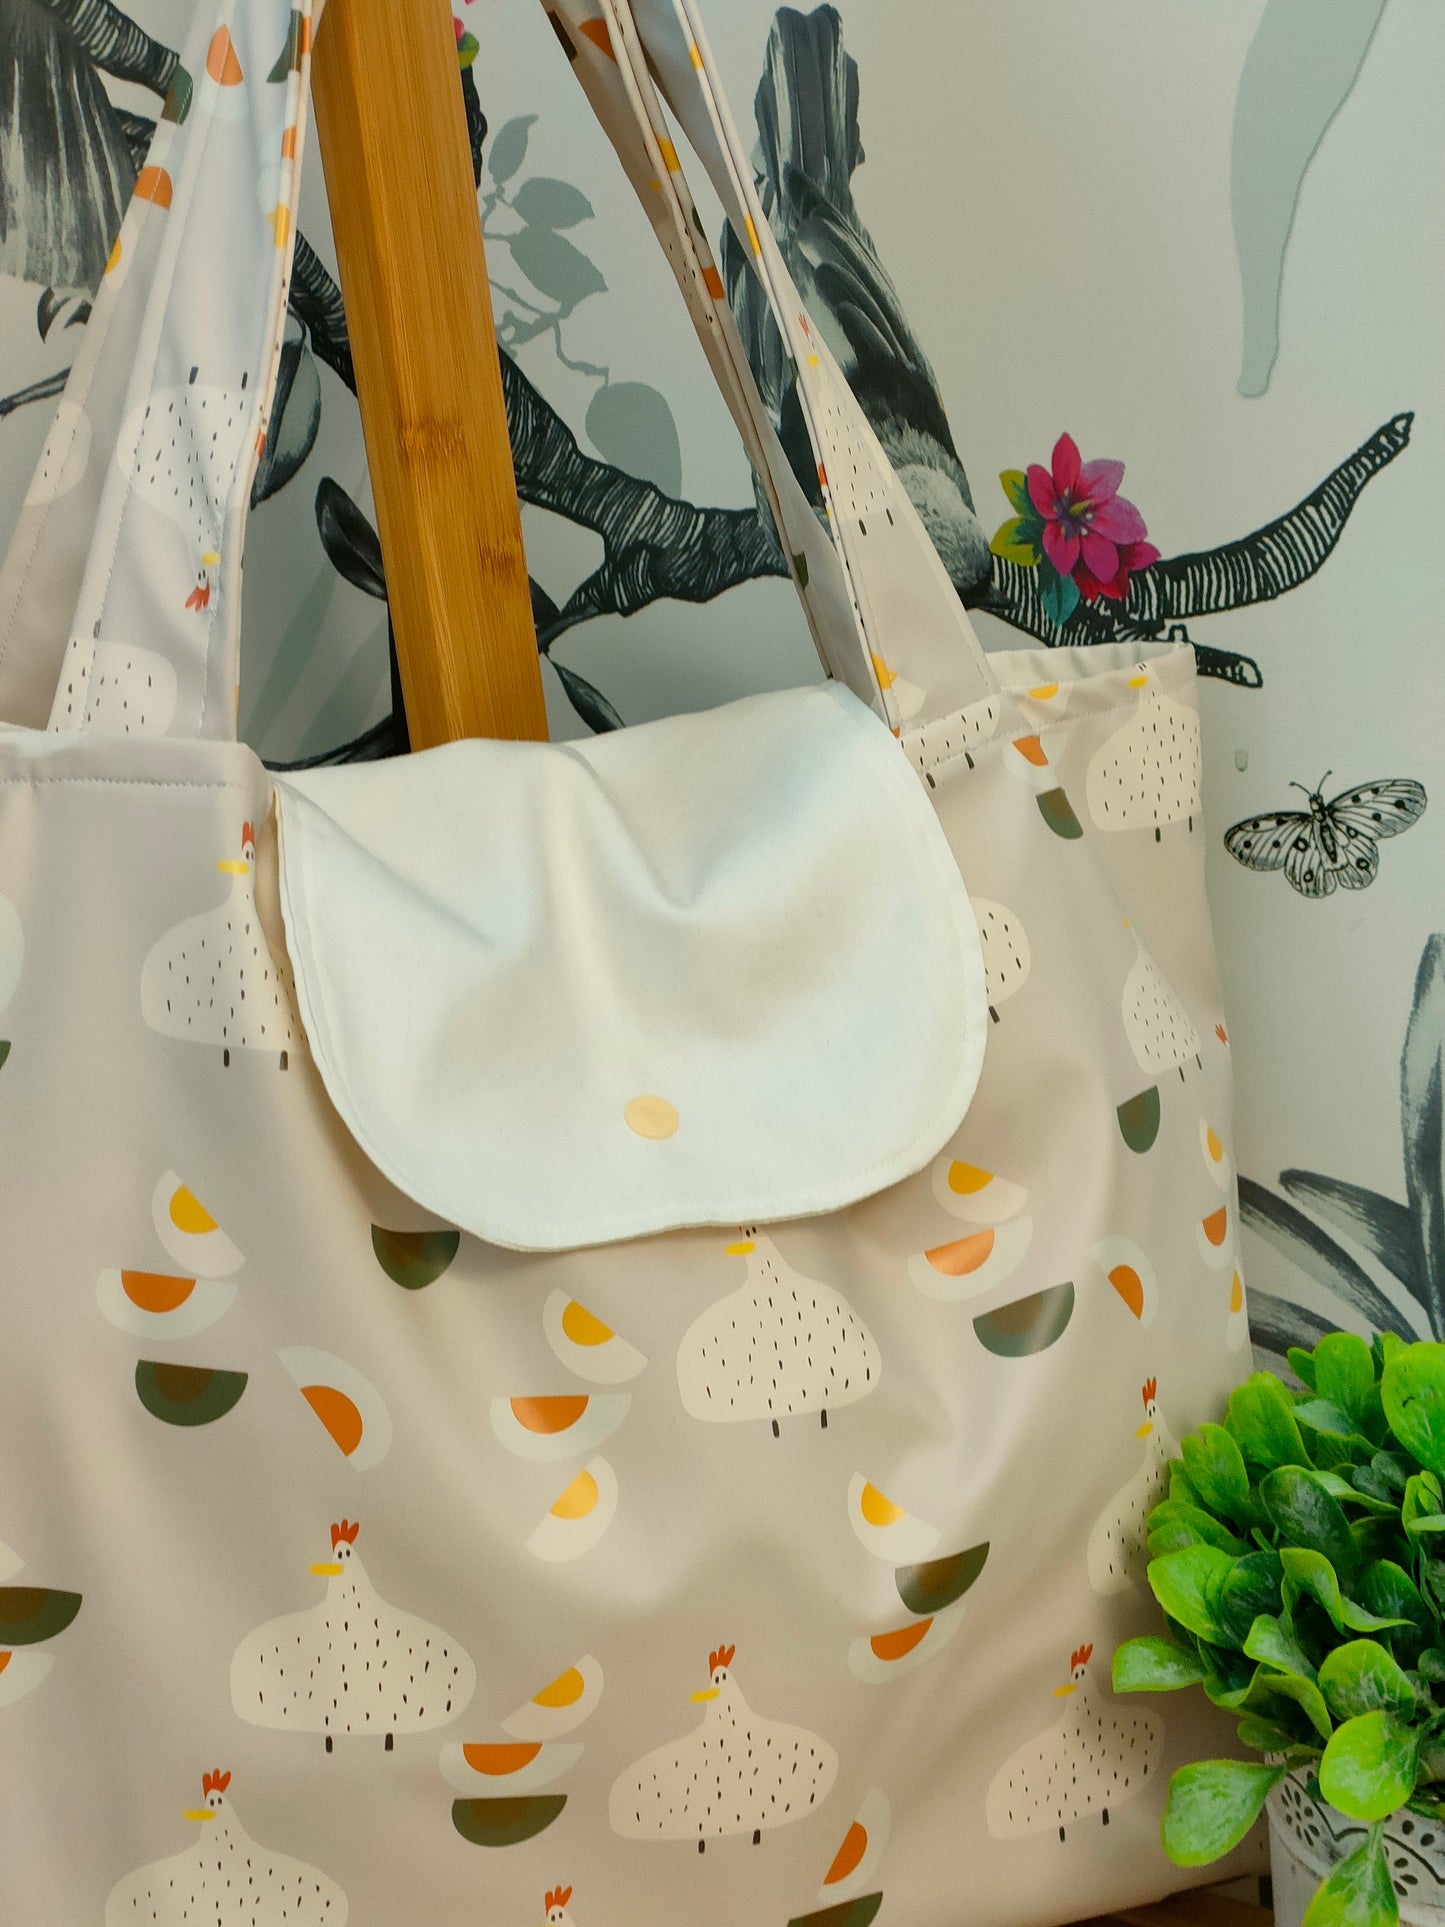 Chicken and Egg Shower Resistant Tote Bag with Inside Pocket, Fully Lined with Shoulder Strap, Everyday Shopping tote Bag, Gift for Chicken Lovers.